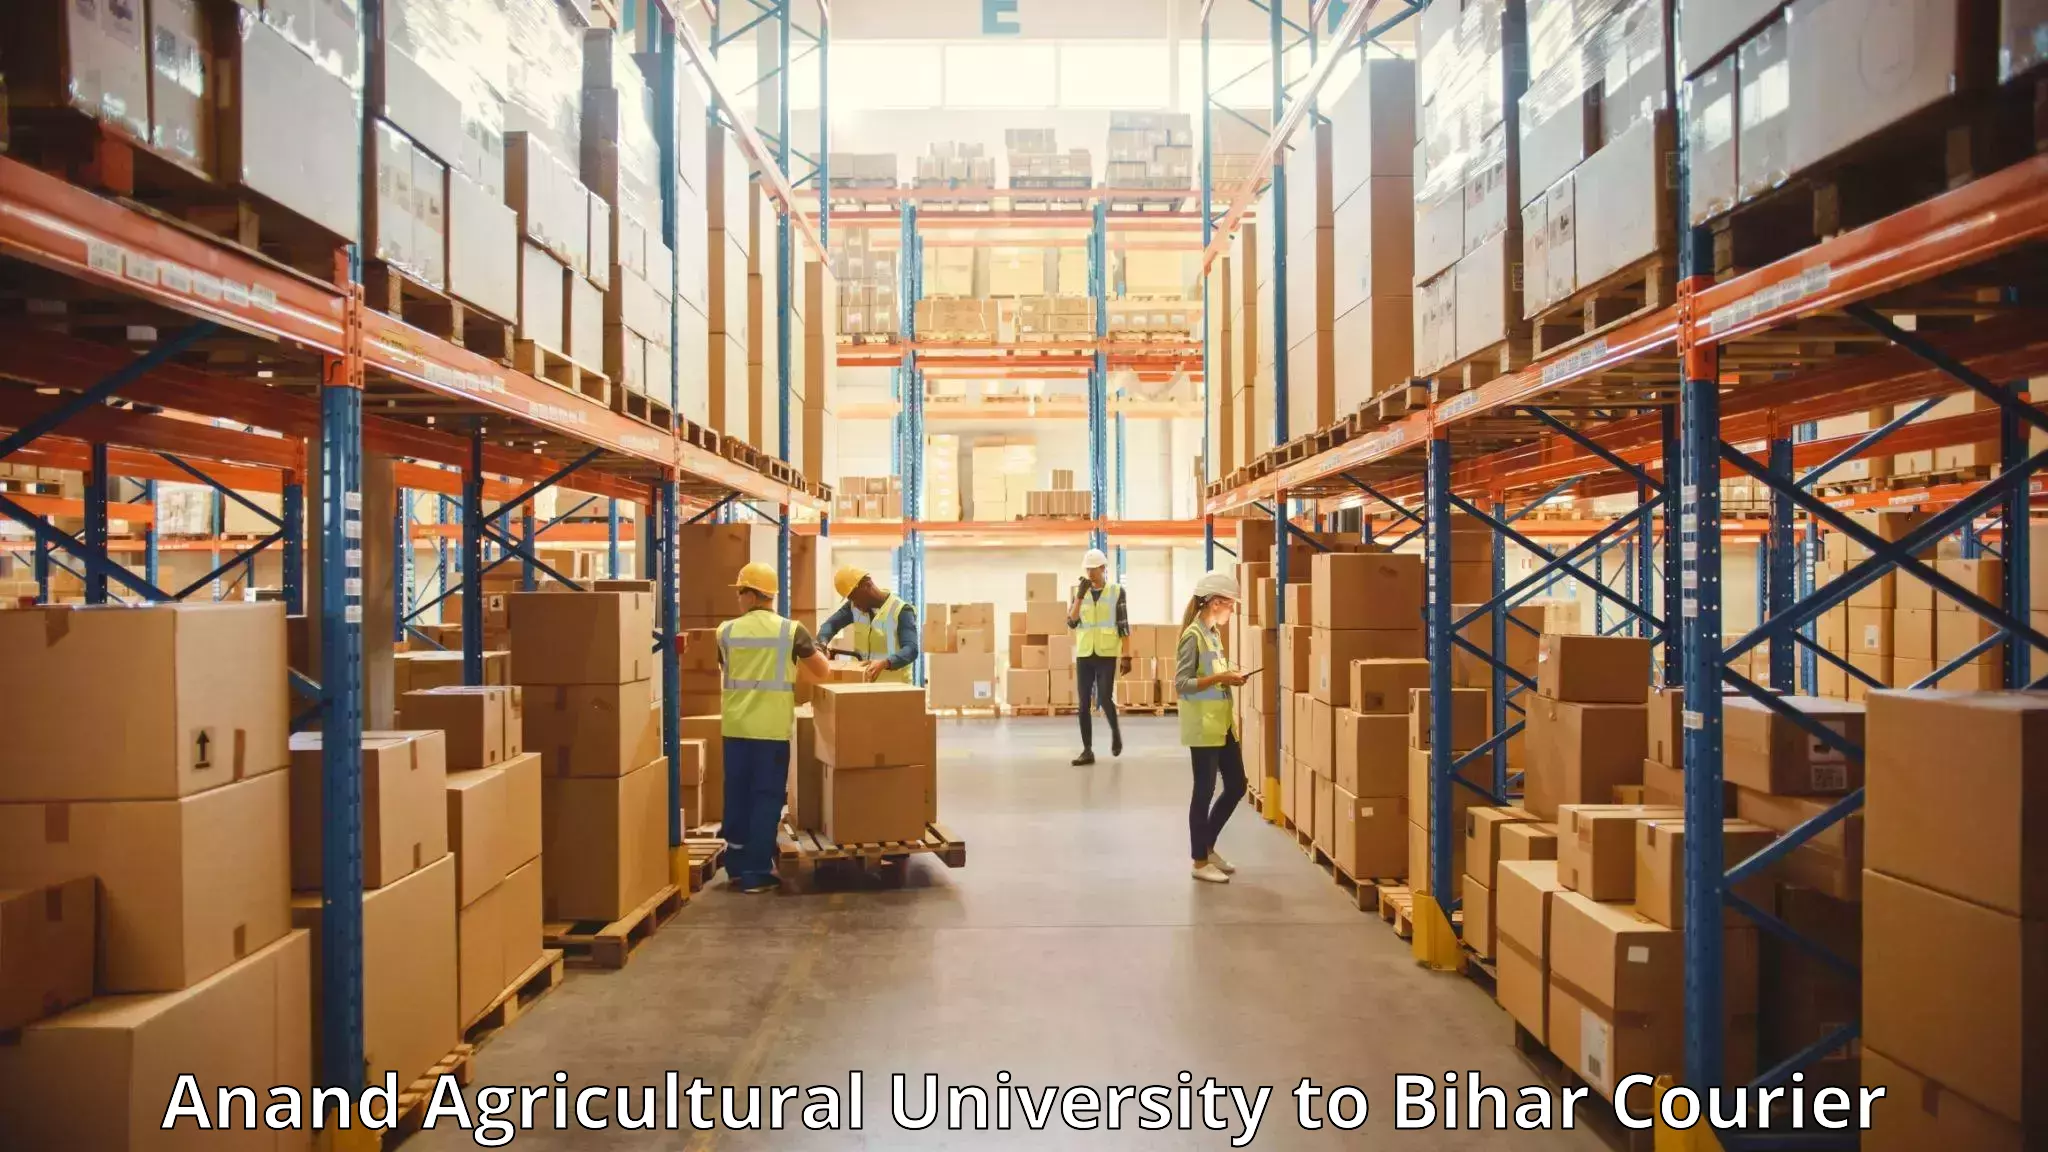 Long distance luggage transport Anand Agricultural University to Kishanganj